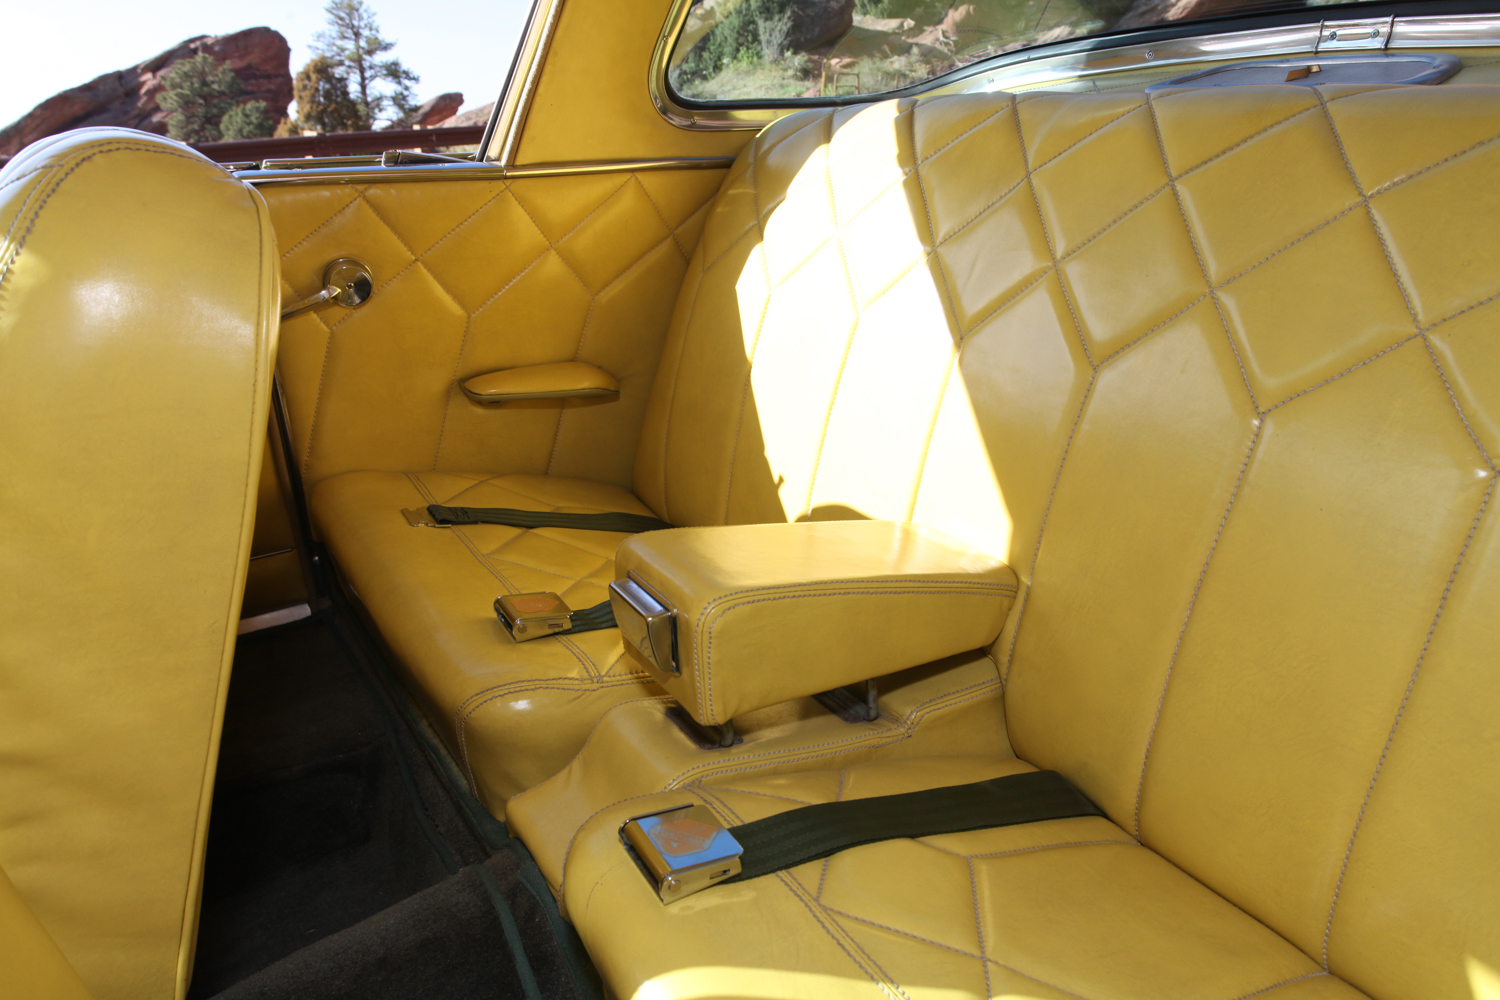 Seats were diamond-quilted top-grain leather.